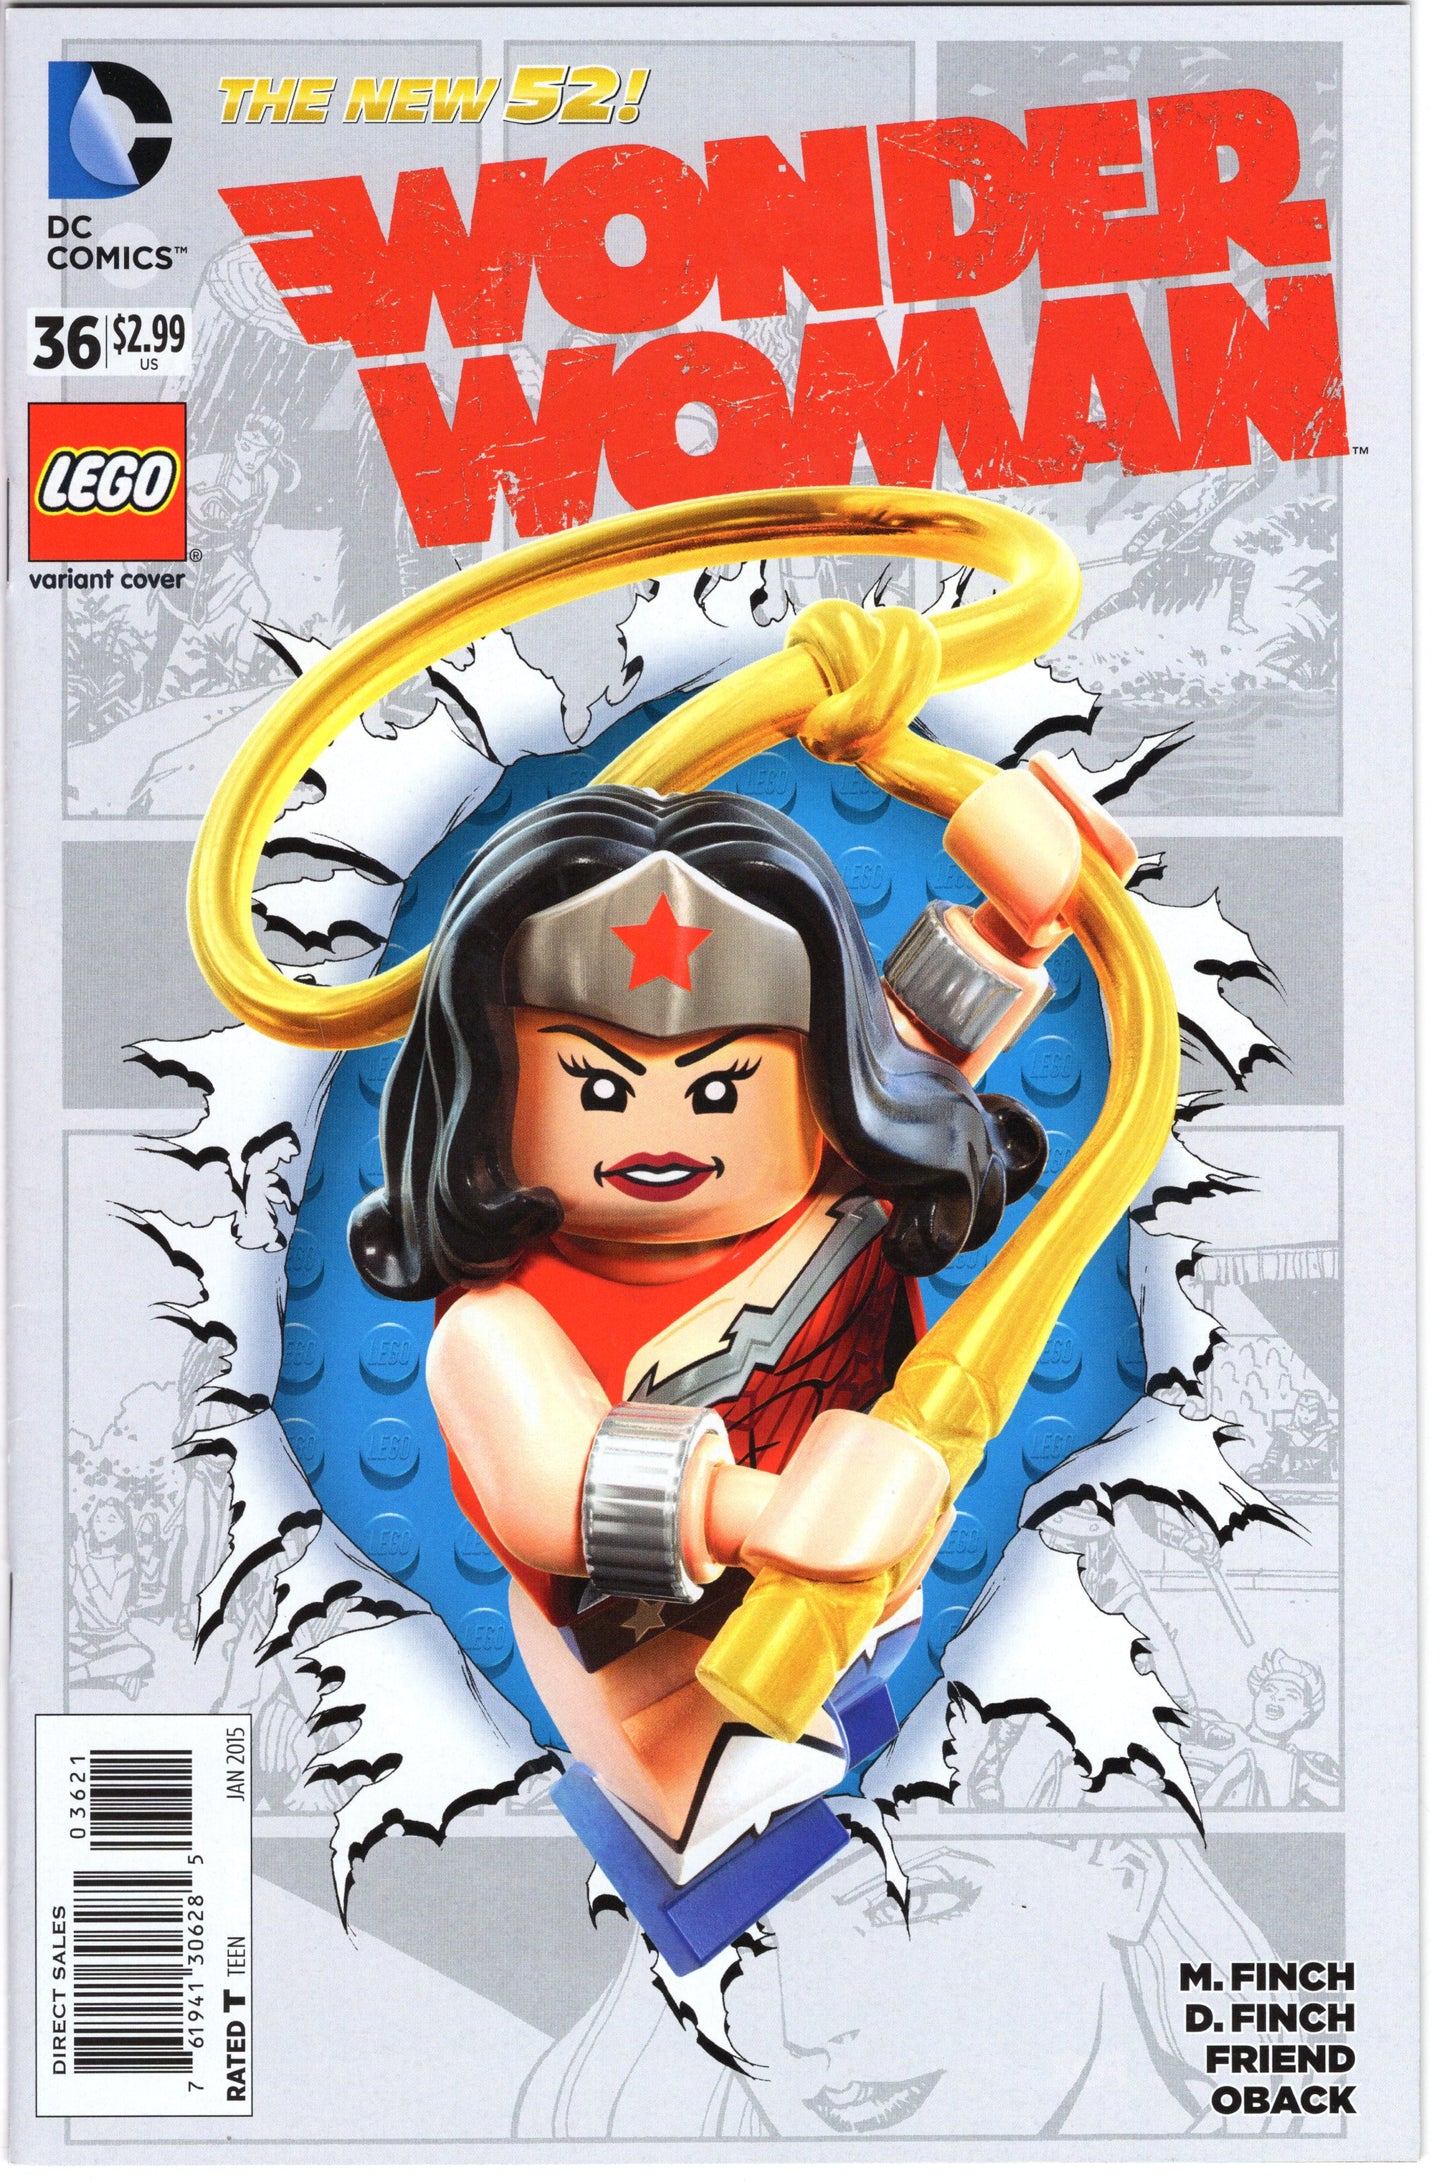 Wonder Woman - Issue #36 "Lego Variant Cover" (Jan. 2015 - DC Comics) NM-